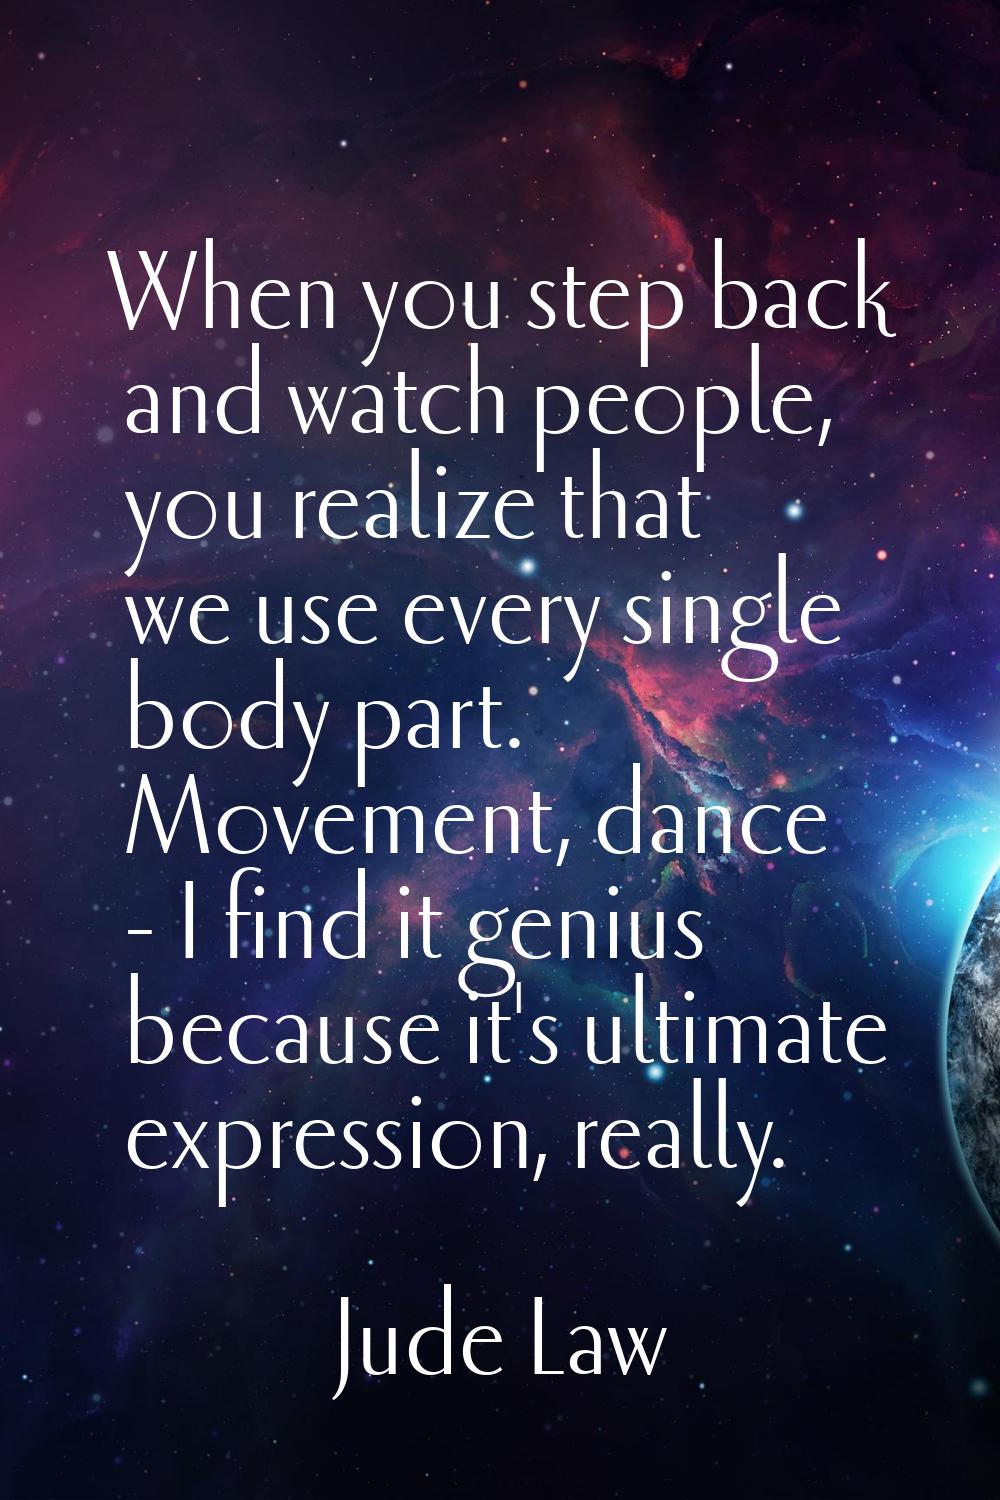 When you step back and watch people, you realize that we use every single body part. Movement, danc